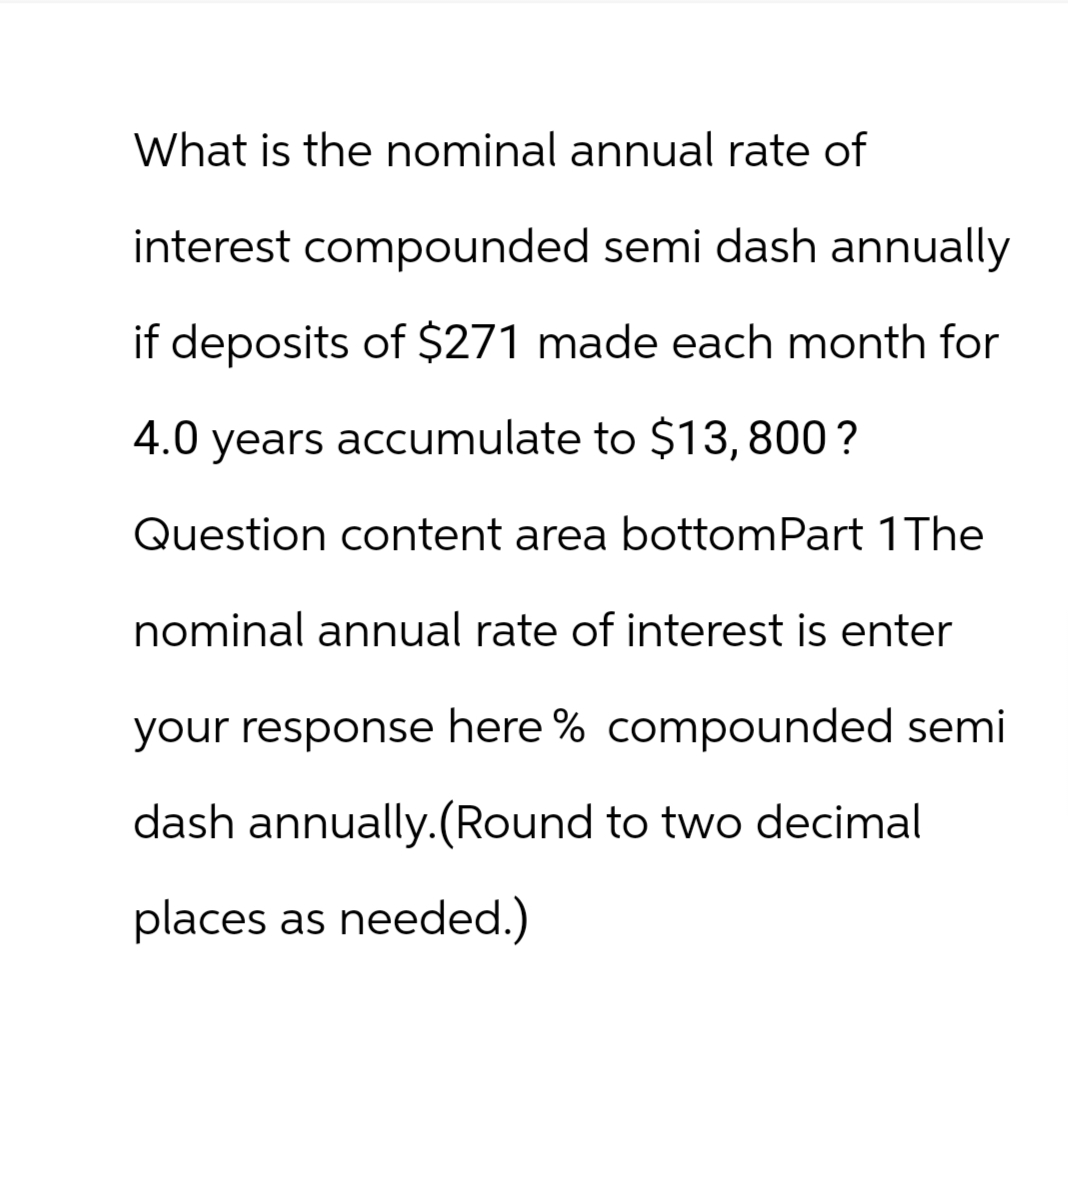 What is the nominal annual rate of
interest compounded semi dash annually
if deposits of $271 made each month for
4.0 years accumulate to $13,800?
Question content area bottom Part 1 The
nominal annual rate of interest is enter
your response here % compounded semi
dash annually. (Round to two decimal
places as needed.)